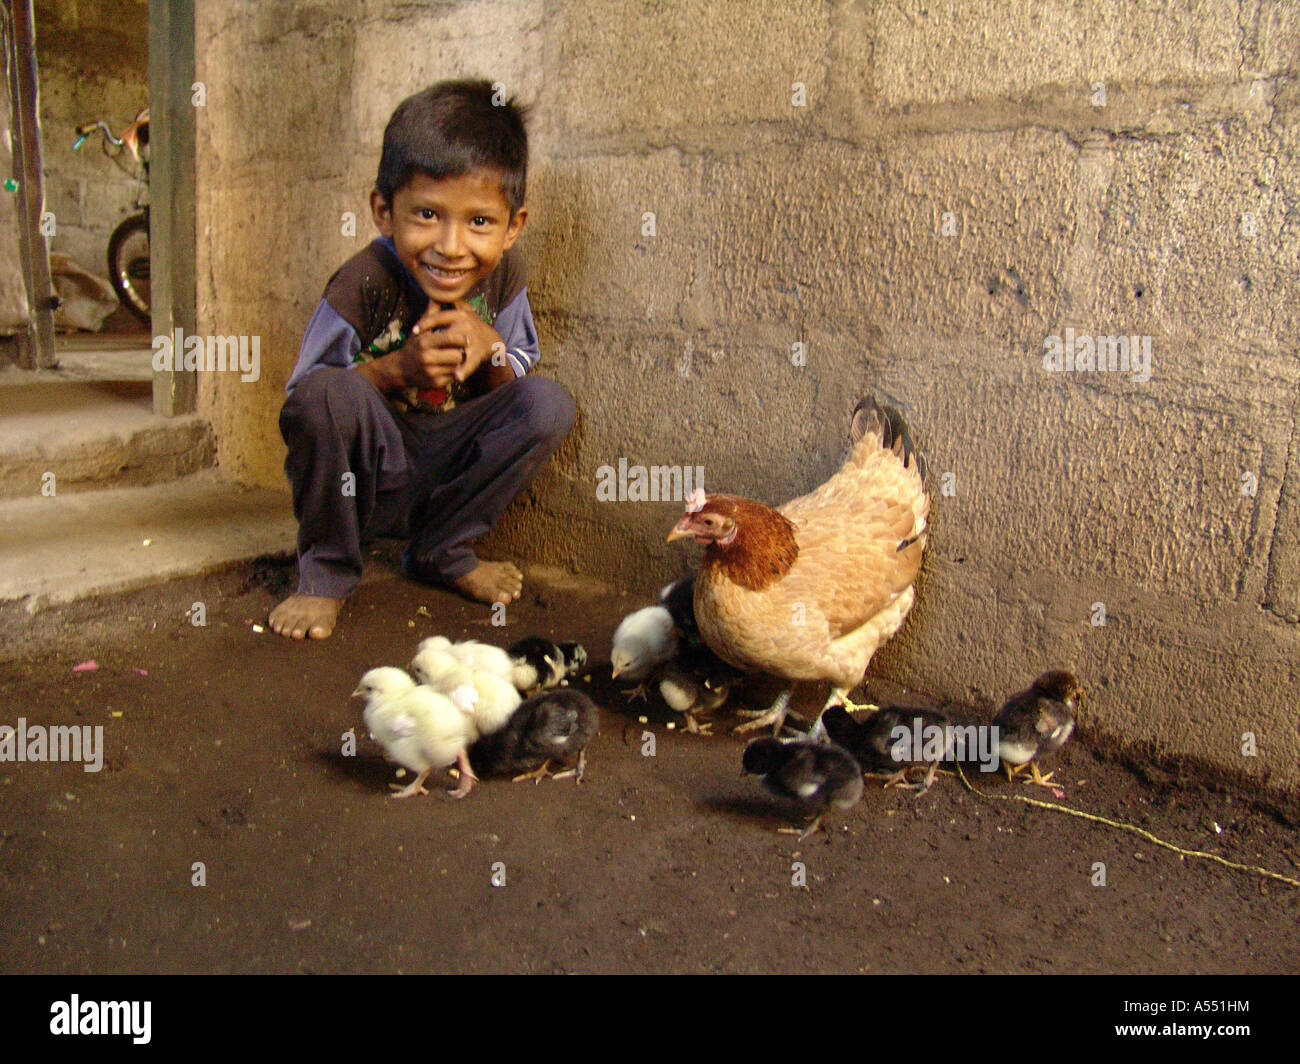 Painet ip2344 nicaragua boy feeding chickens posoltega country developing nation less economically developed culture Stock Photo